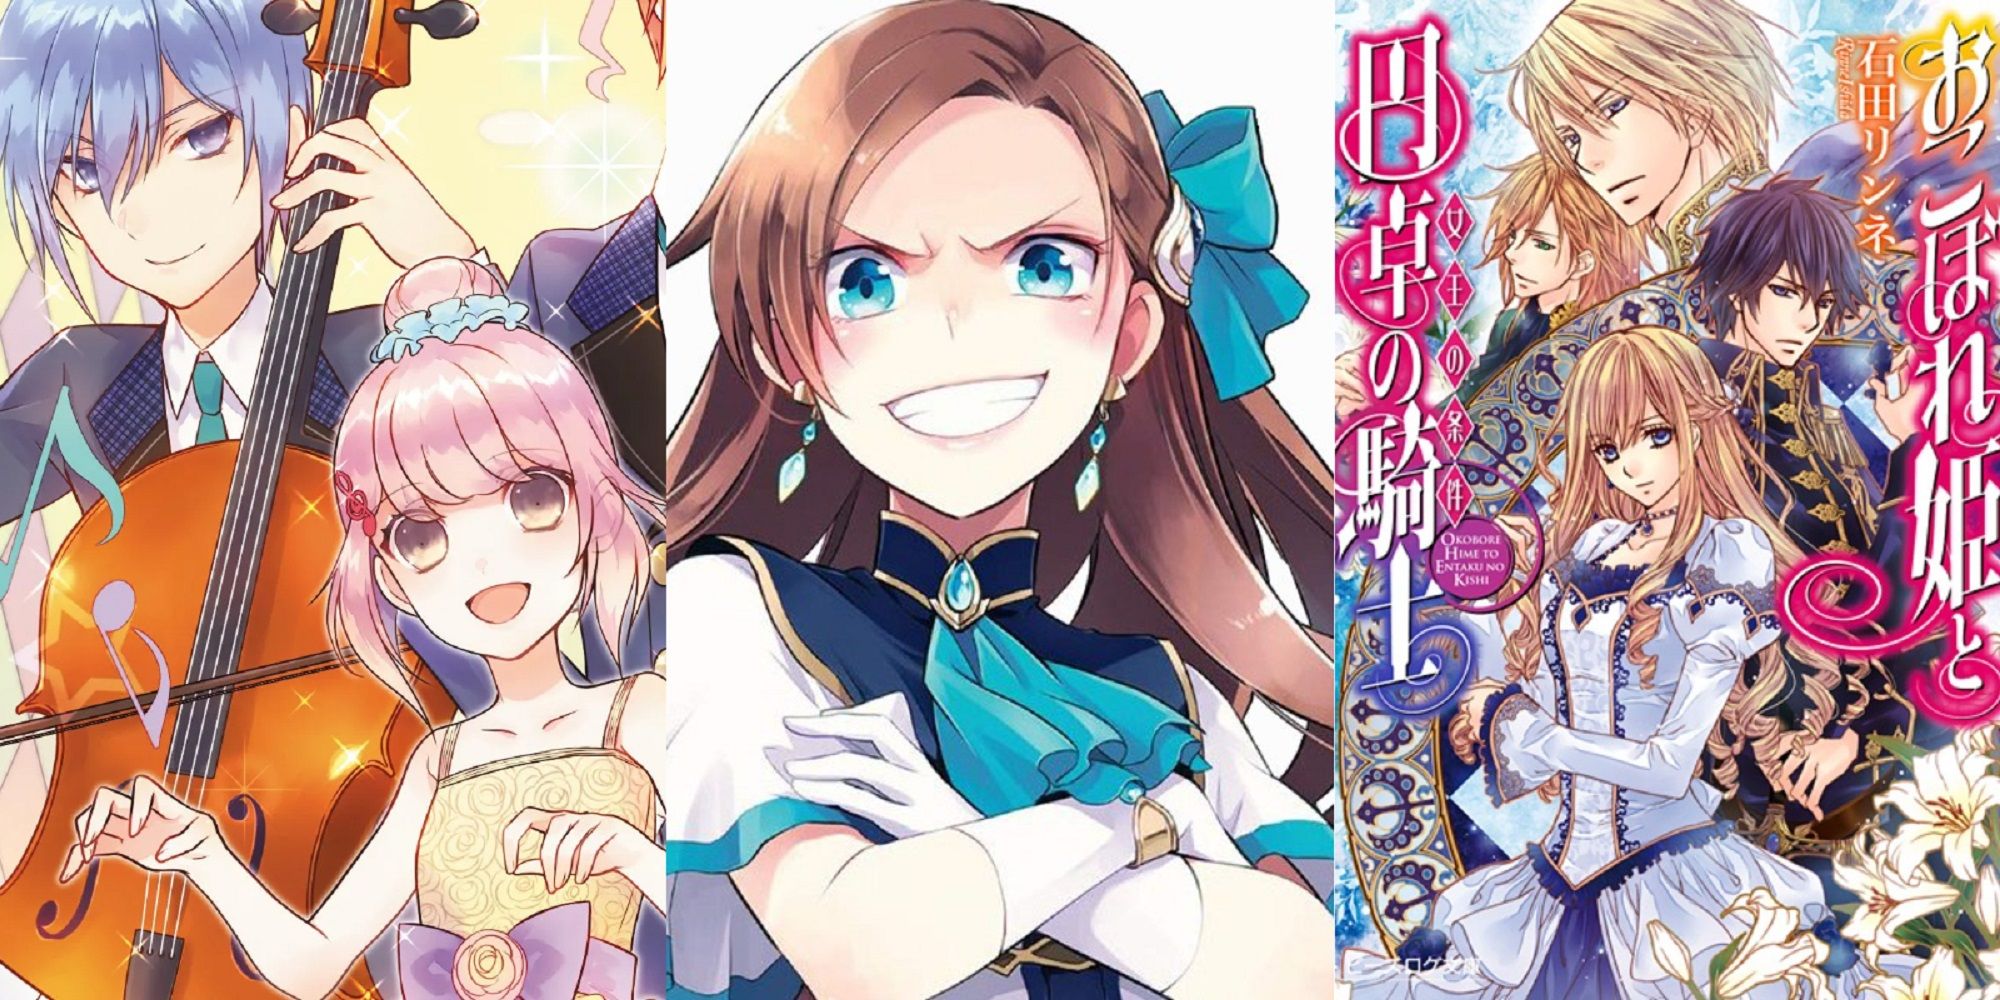 Split image of Mashiro and Kou from Obsessions of an Otome Gamer, Katarina from My Next Life as a Villainess, and Leticia and her knights from The Leftover Princes and the Knights of the Round Table